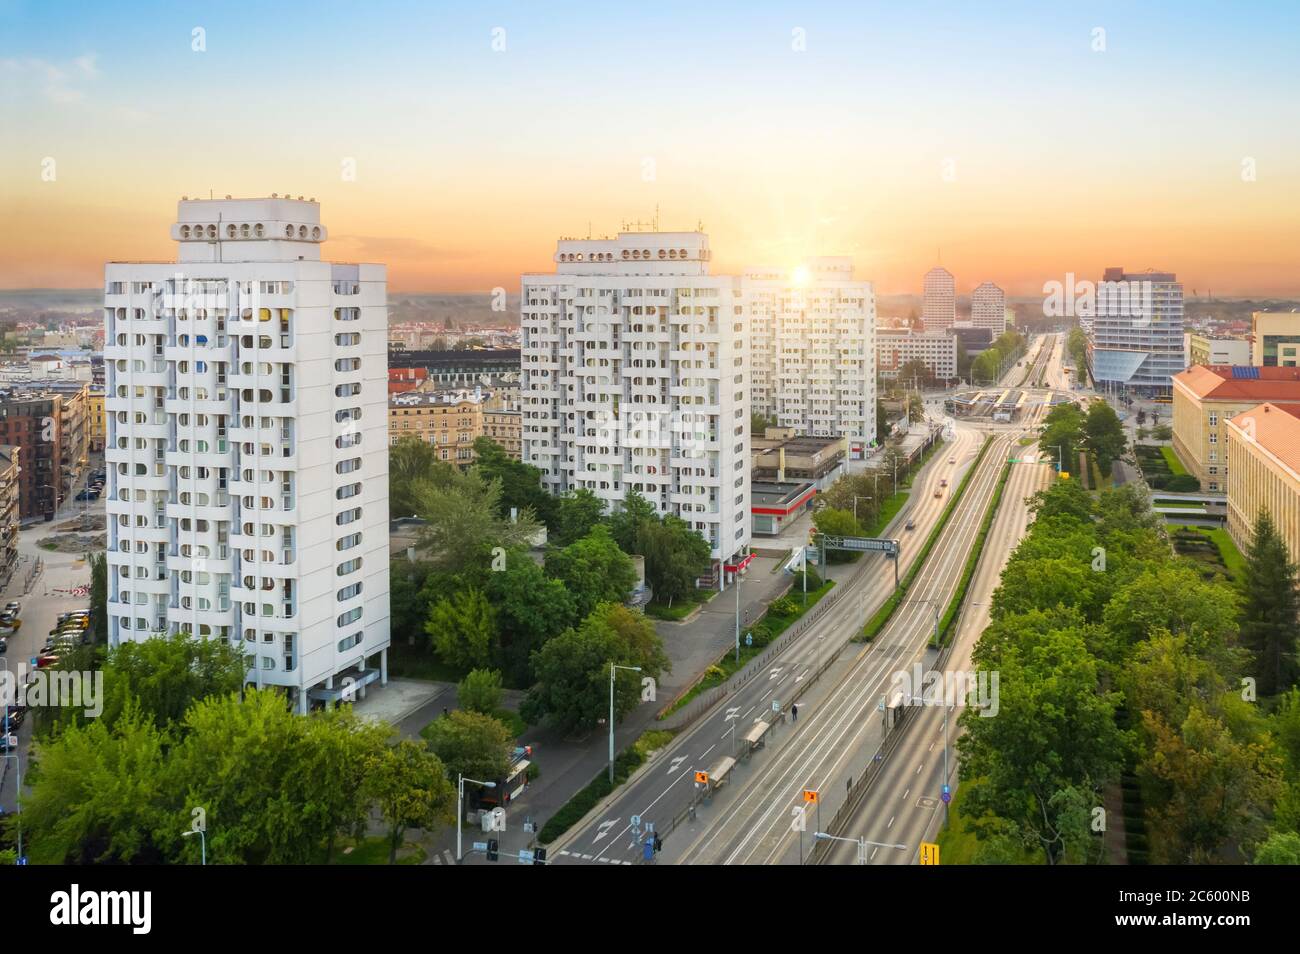 Wroclaw, Poland. Tall residential buildings renovated in 2015, called 'Wroclaw's Manhattan'. One of architectural landmarks of the city Stock Photo